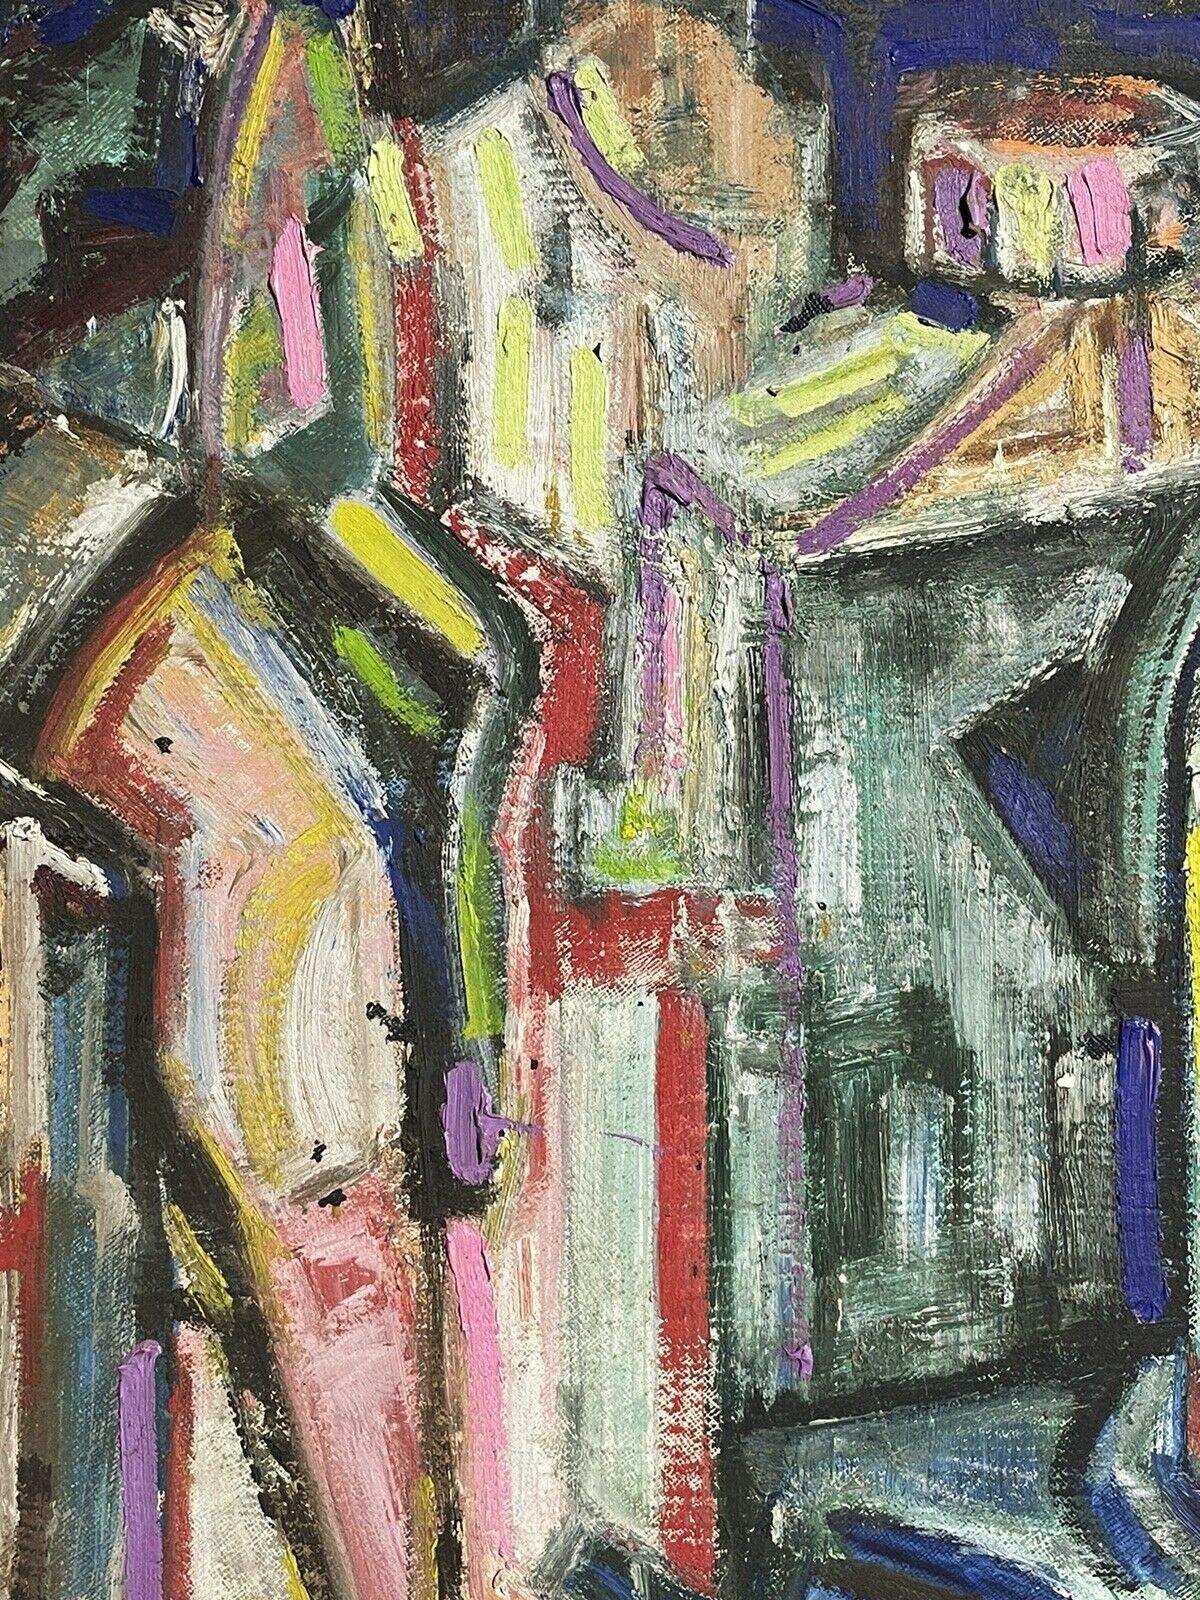 LAURIE NORMAN (1927-2019) LARGE OIL - ABSTRACT CUBIST VIEW OF BUILDINGS/ TOWN - Impressionist Painting by Laurie Norman